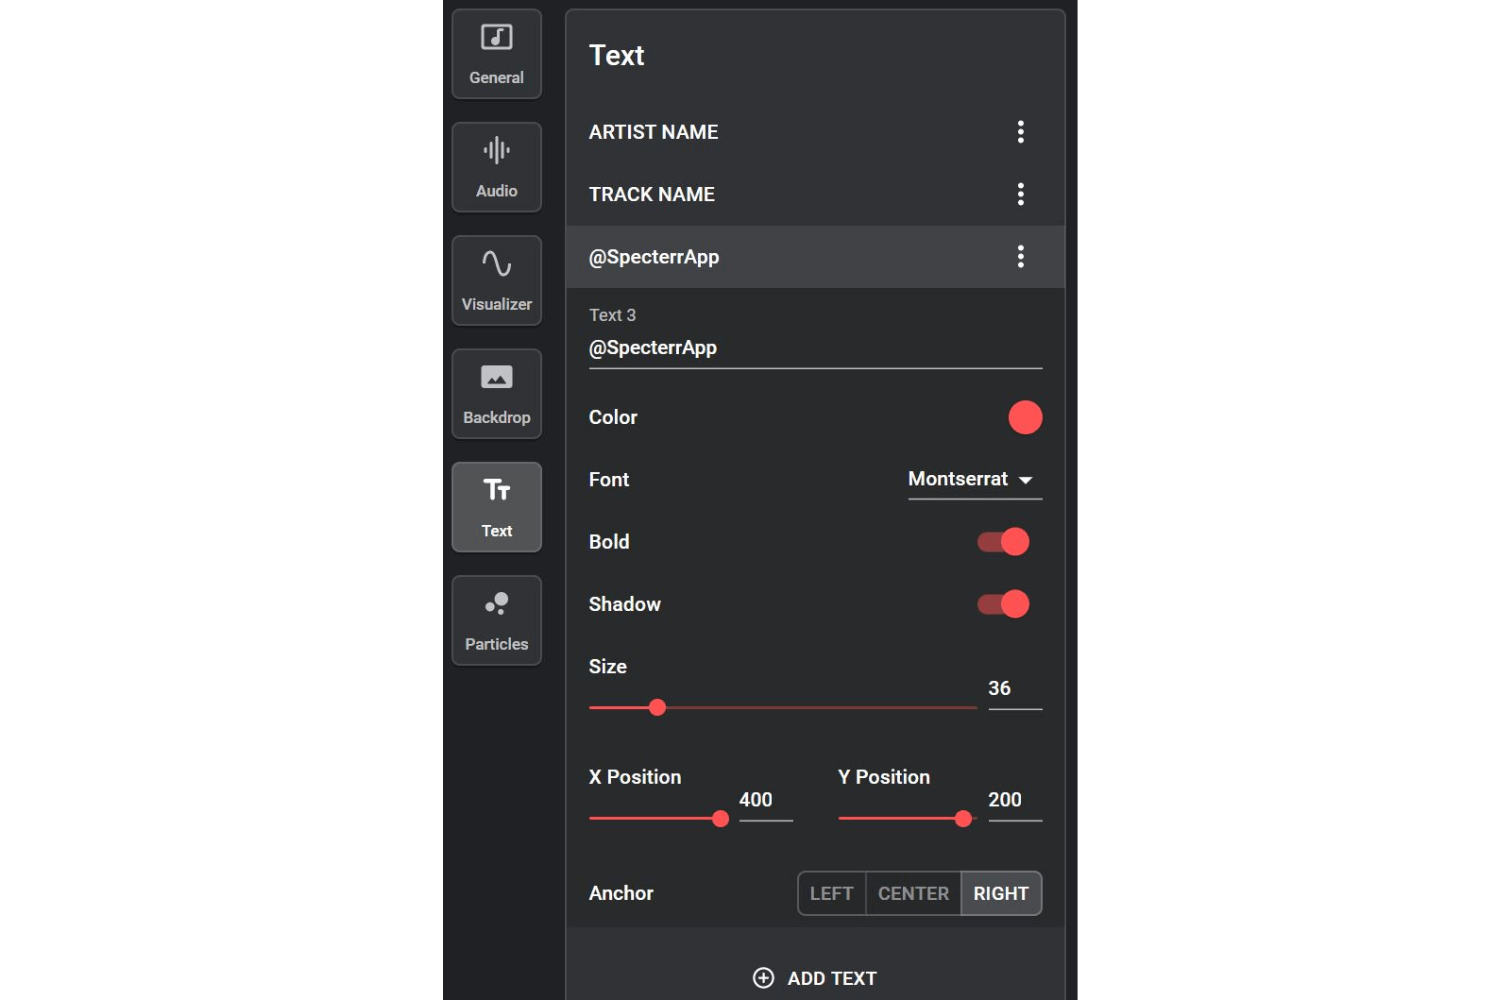 Text controls in the Specterr editor